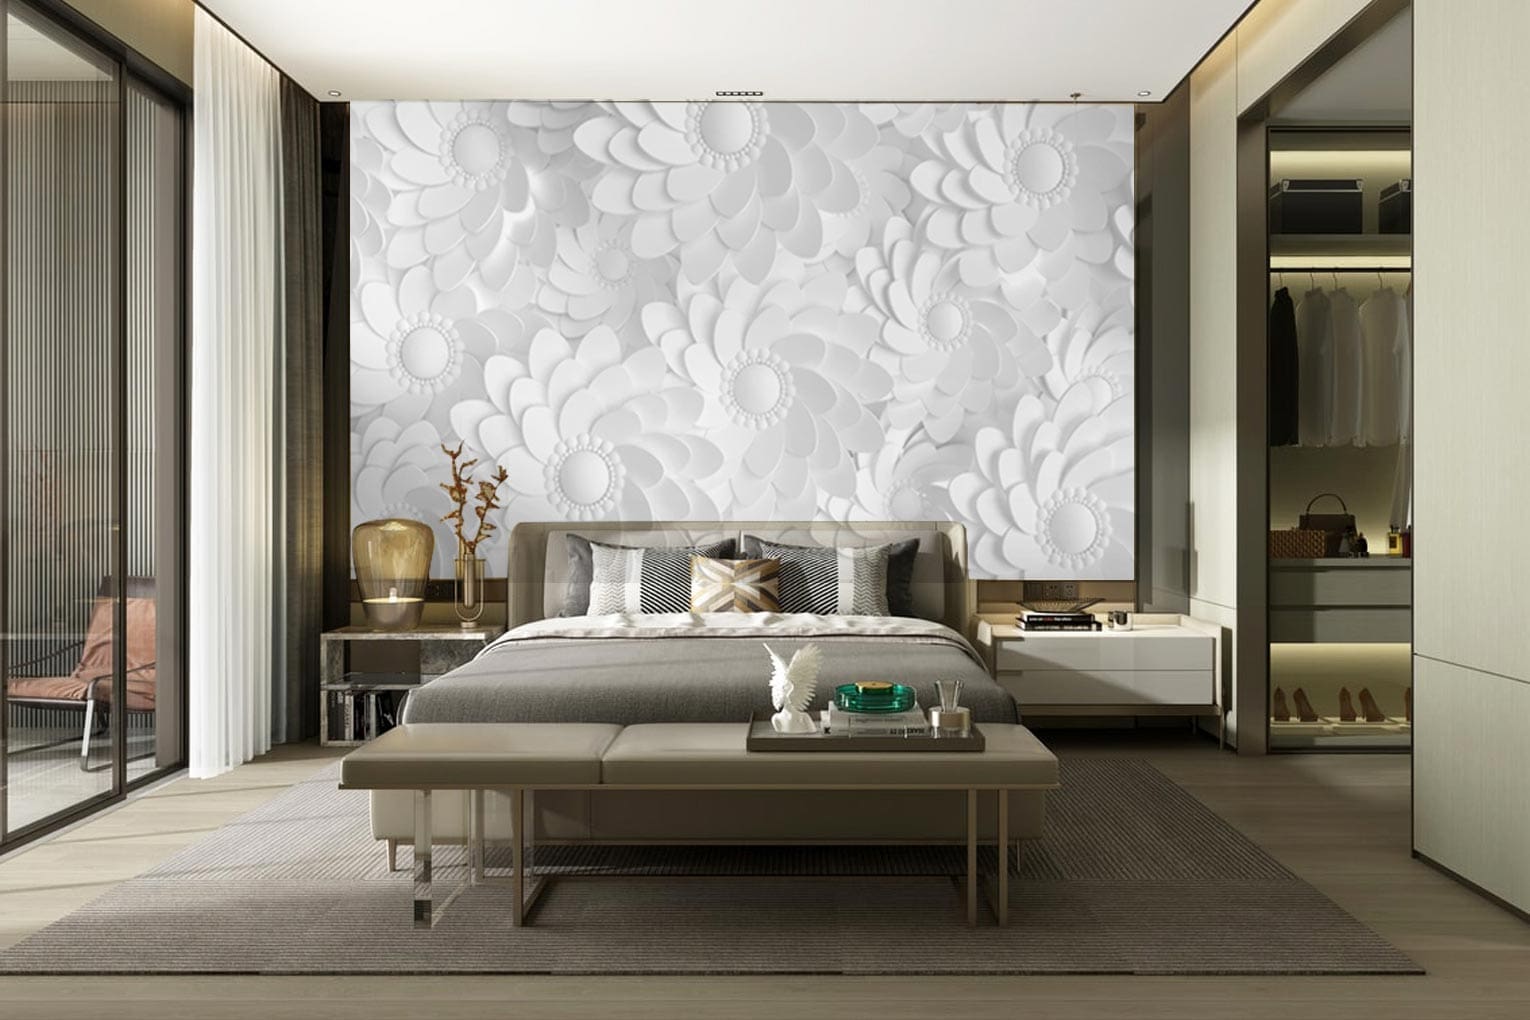 3d wall painting designs for living room